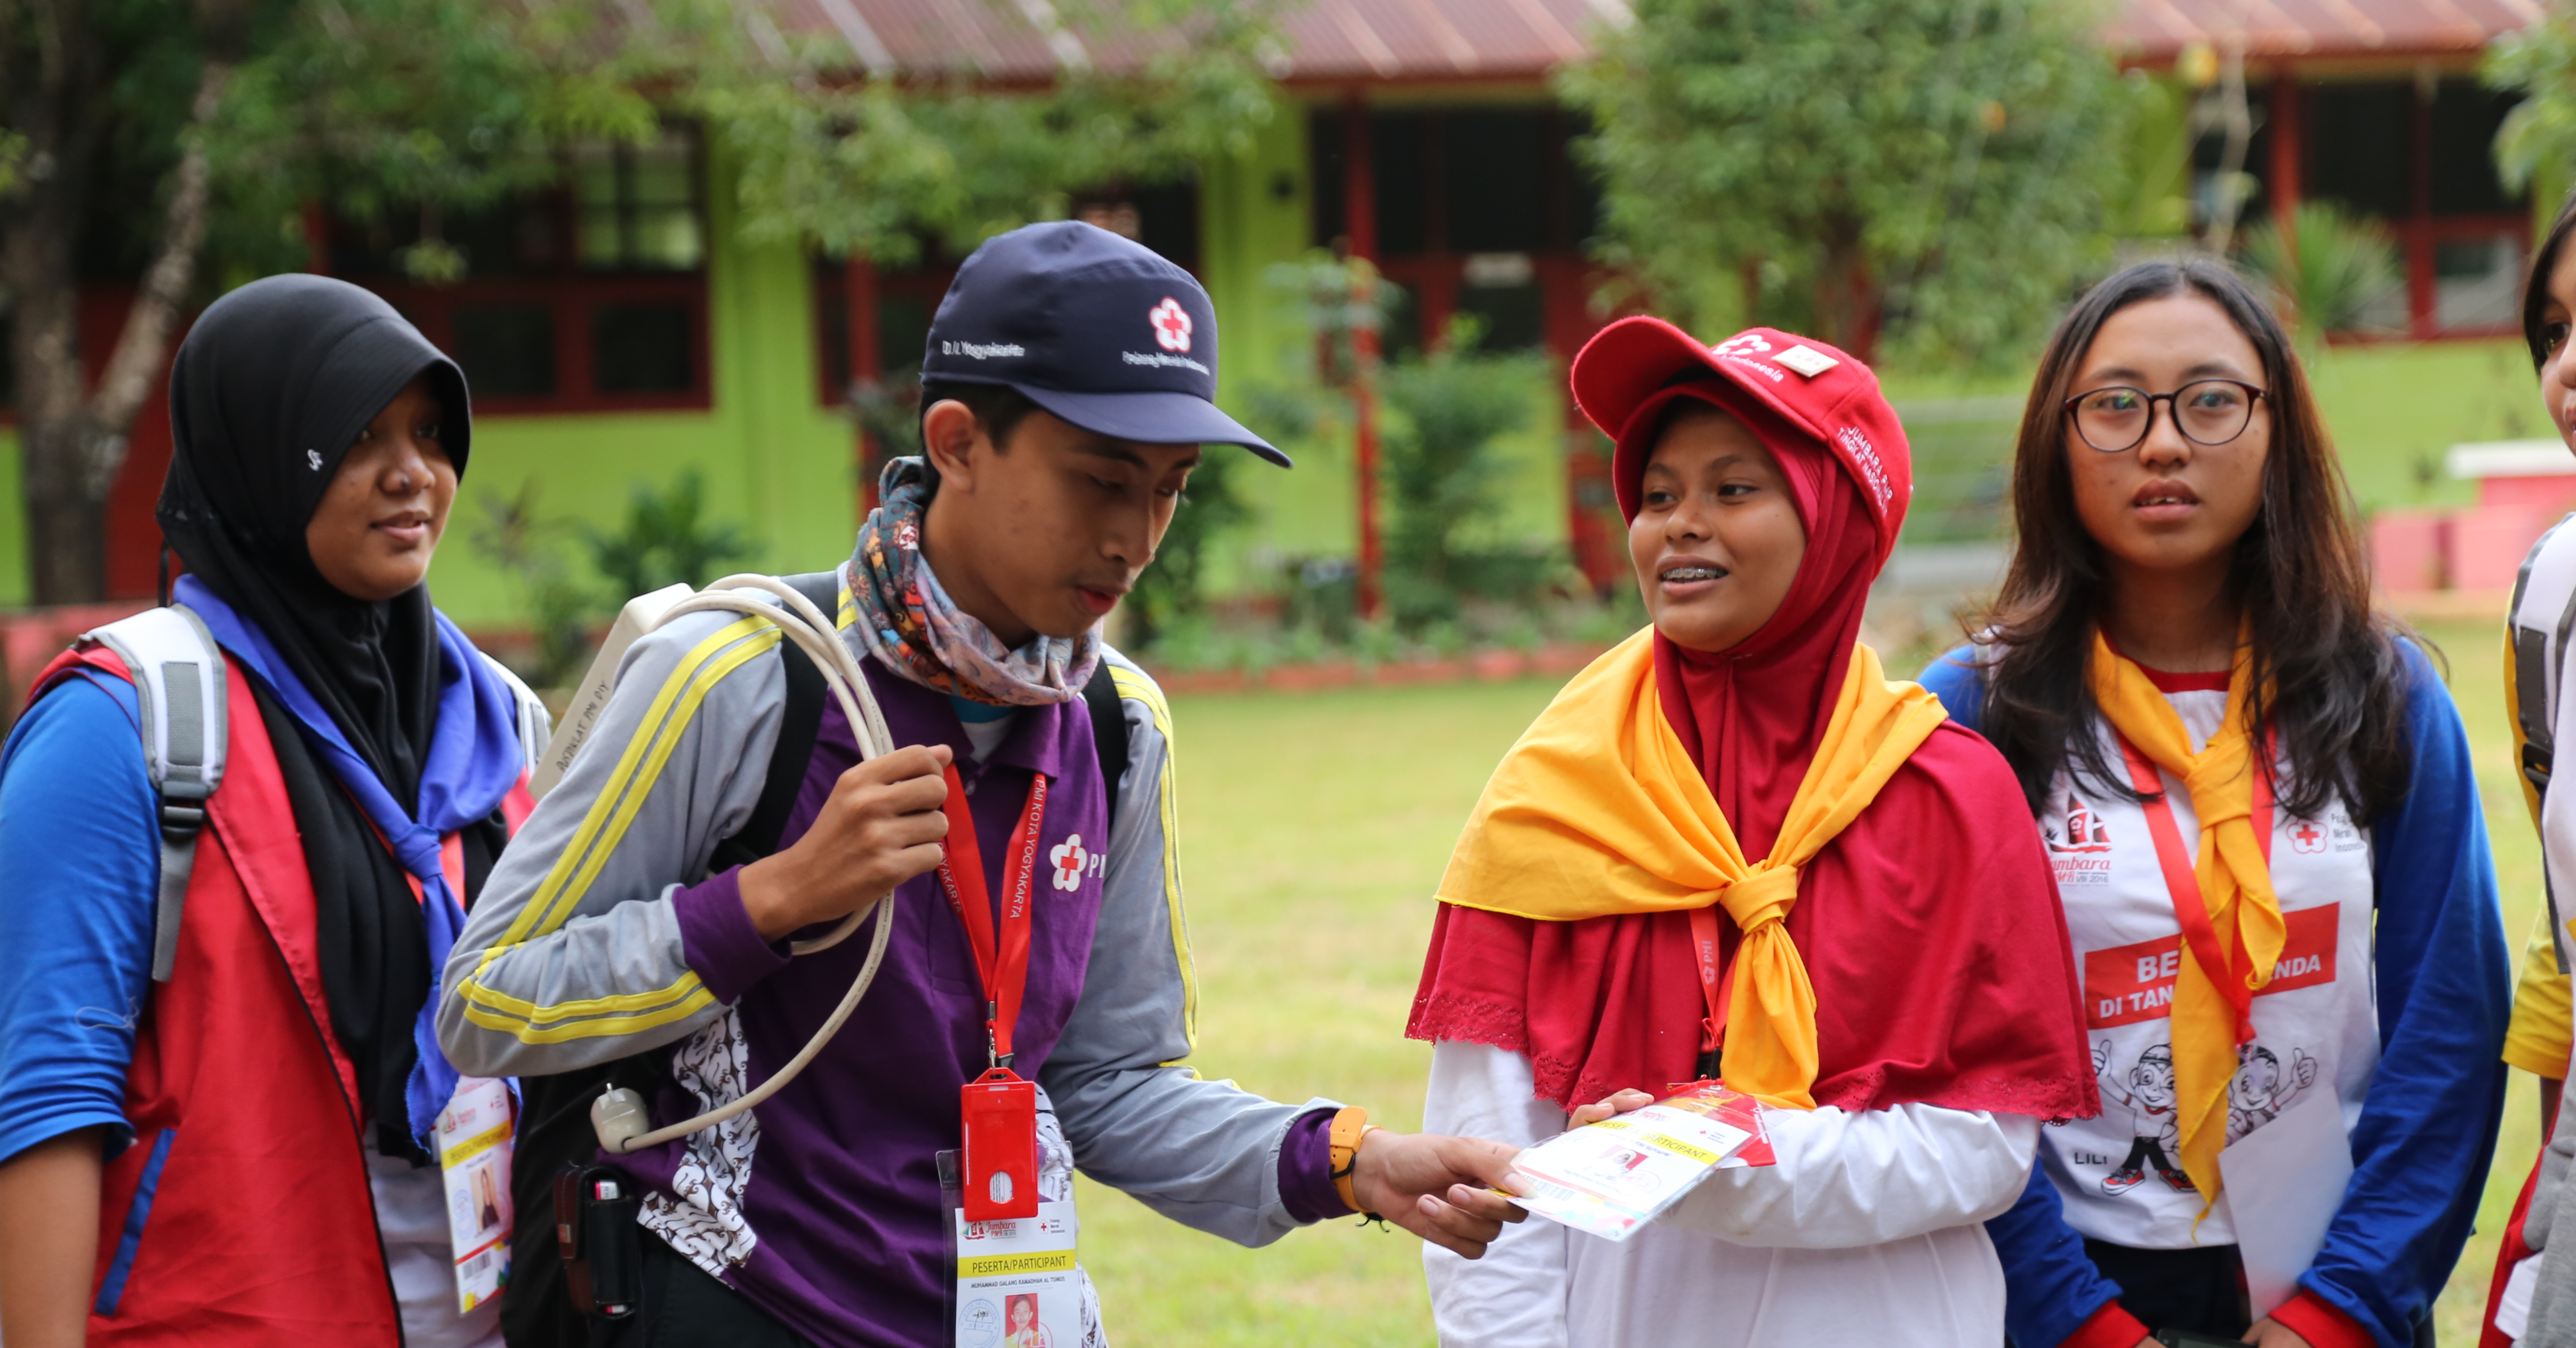 Member of PMI Youth Volunteers participated in Youth Journalism activity during Youth Gathering in Pangkep, South Sulawesi, July 25, 2016.